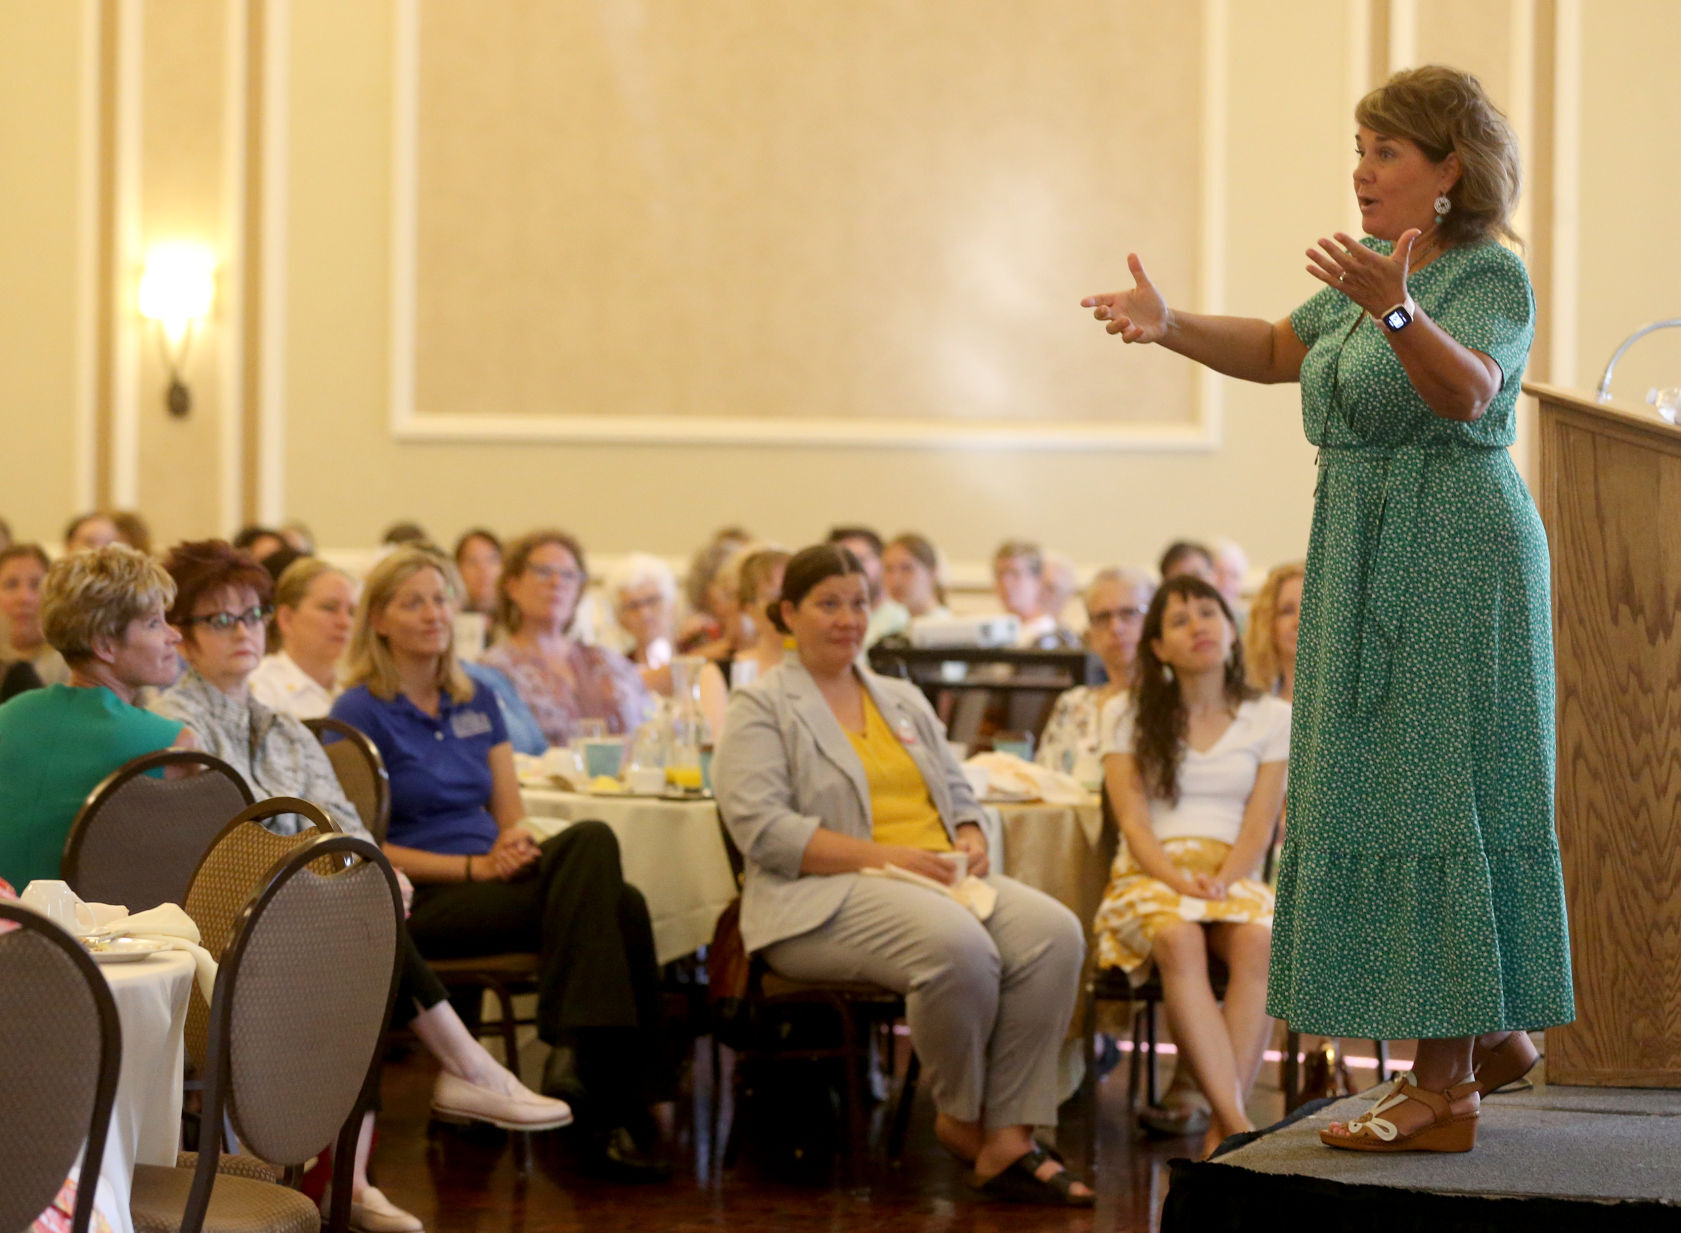 Annie Meehan speaks during the Opening Doors Filling Your Cup event at Hotel Julien Dubuque on Thursday, June 30, 2022.    PHOTO CREDIT: JESSICA REILLY